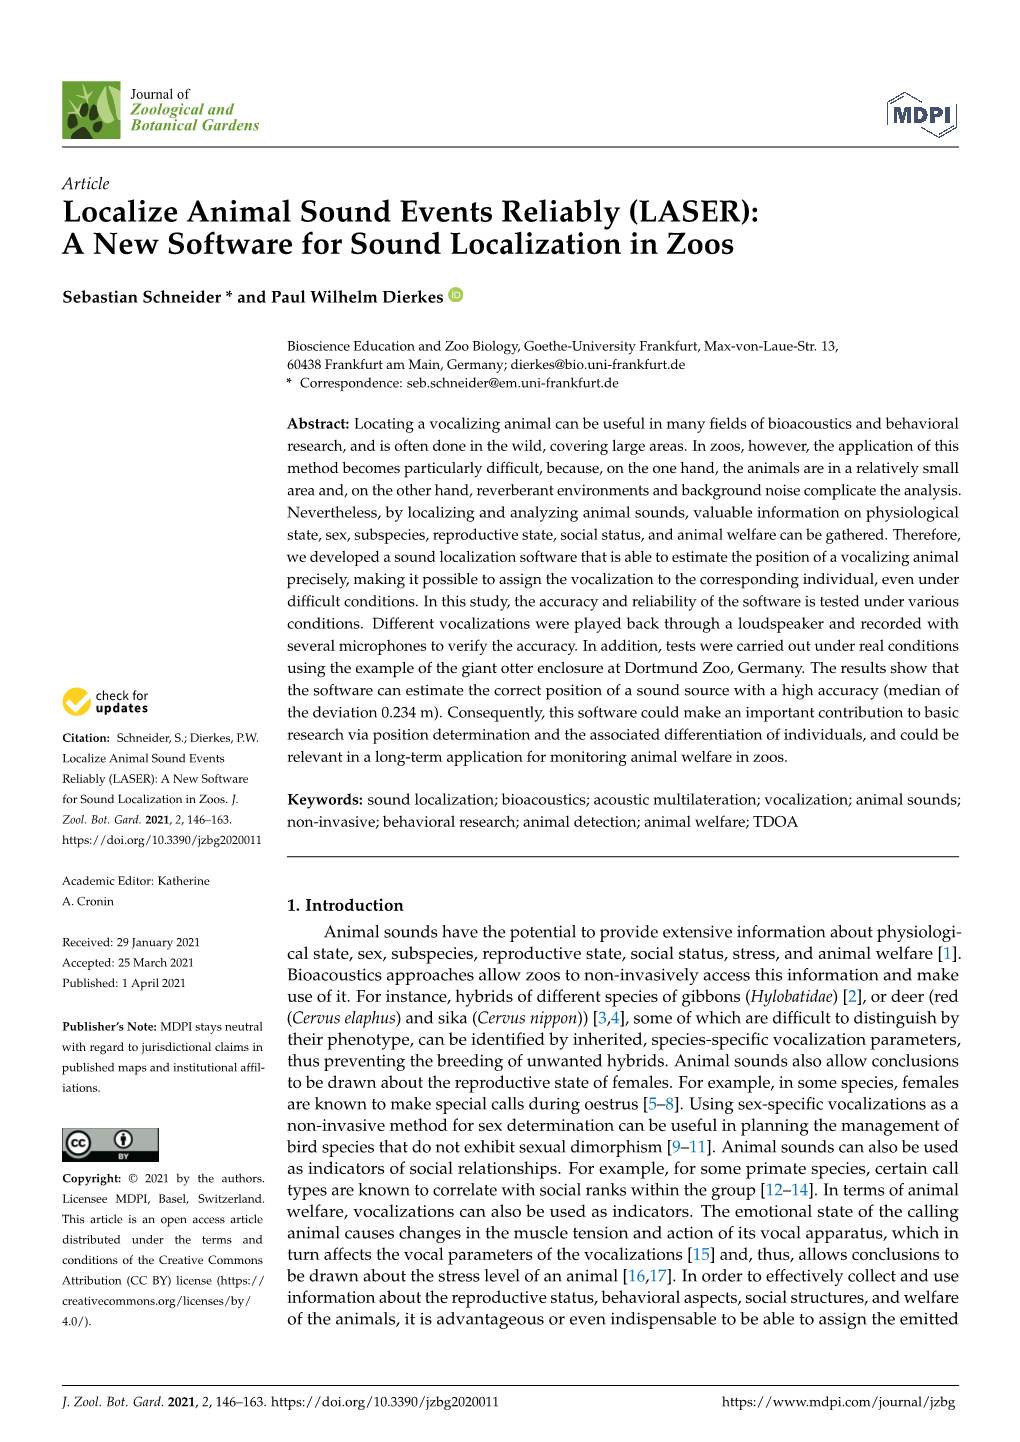 A New Software for Sound Localization in Zoos